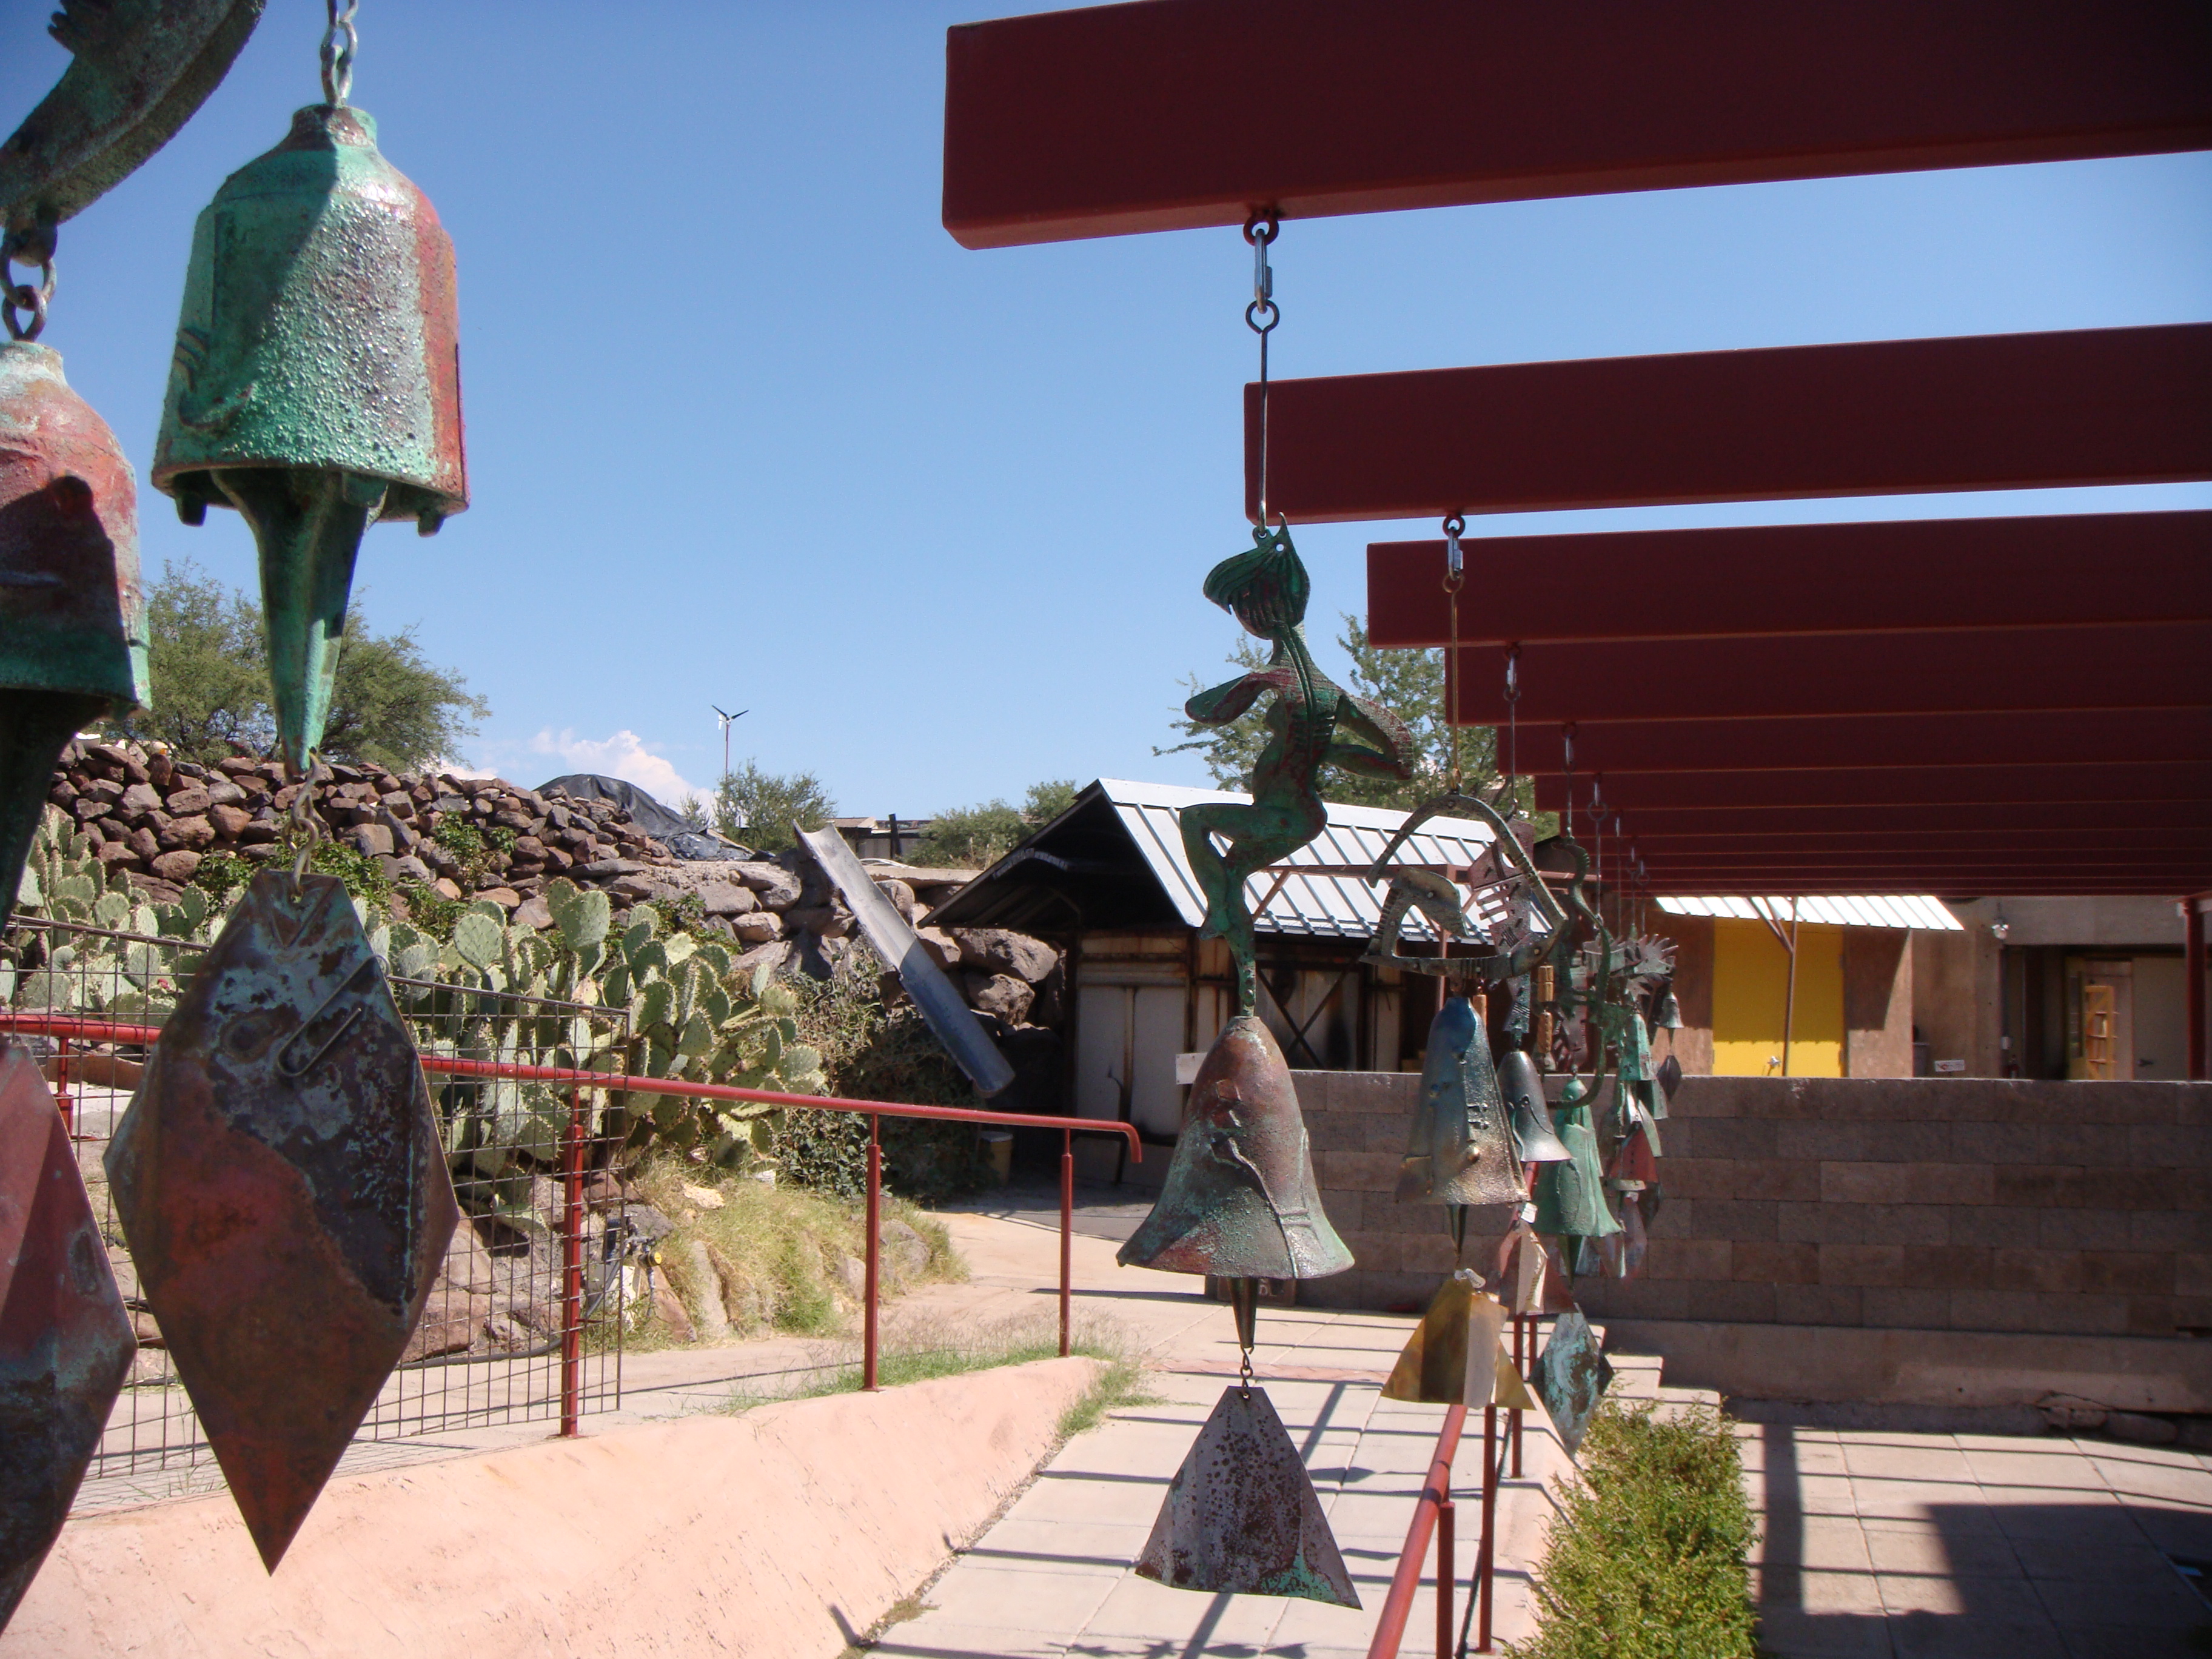 Soleri bells in Arcosanti. Sales of the bells support a large portion of the community’s operation. Credit: theregeneration on Flickr